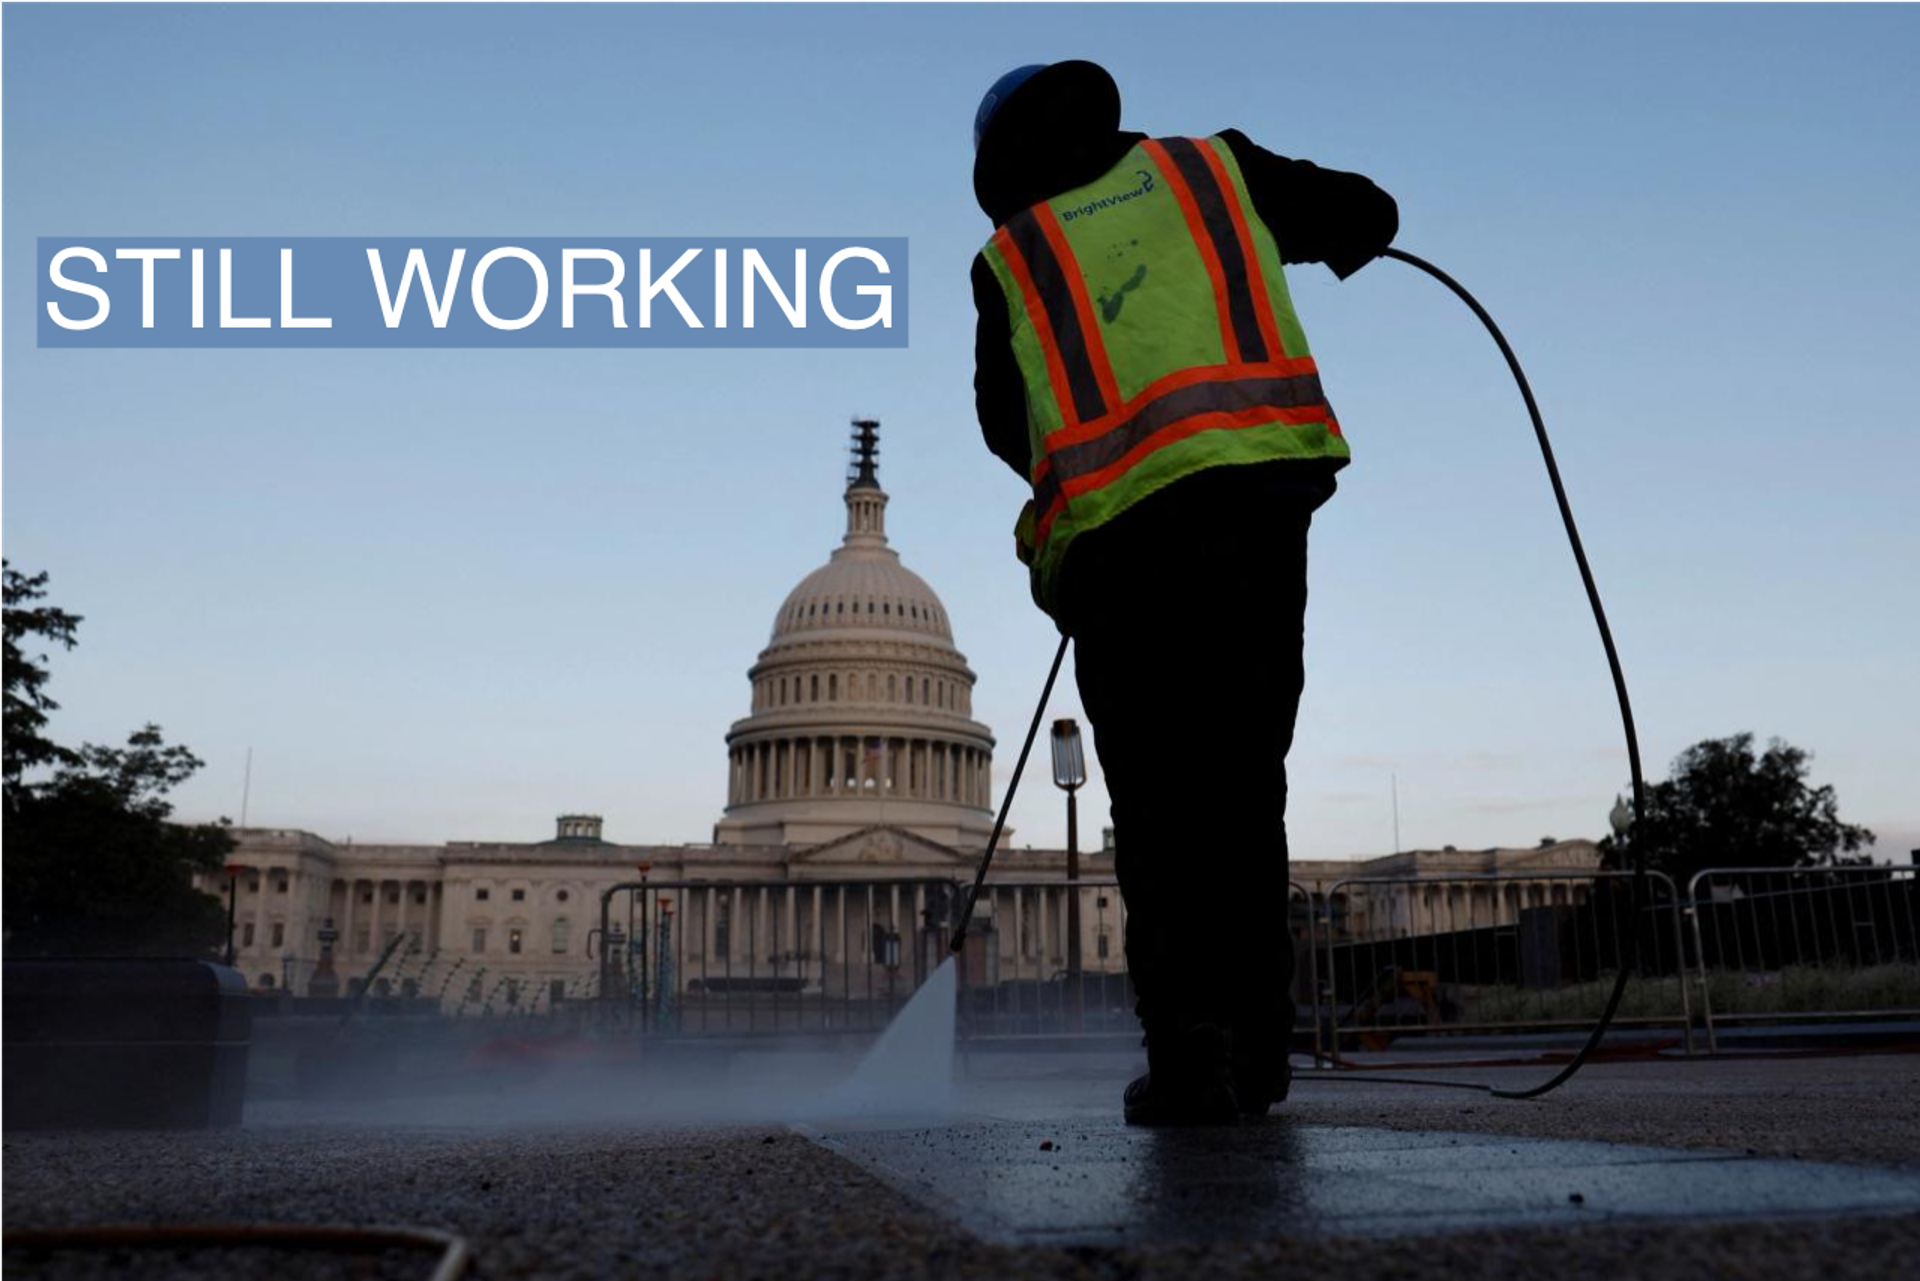 A worker cleans the sidewalk on the grounds of the U.S. Capitol.